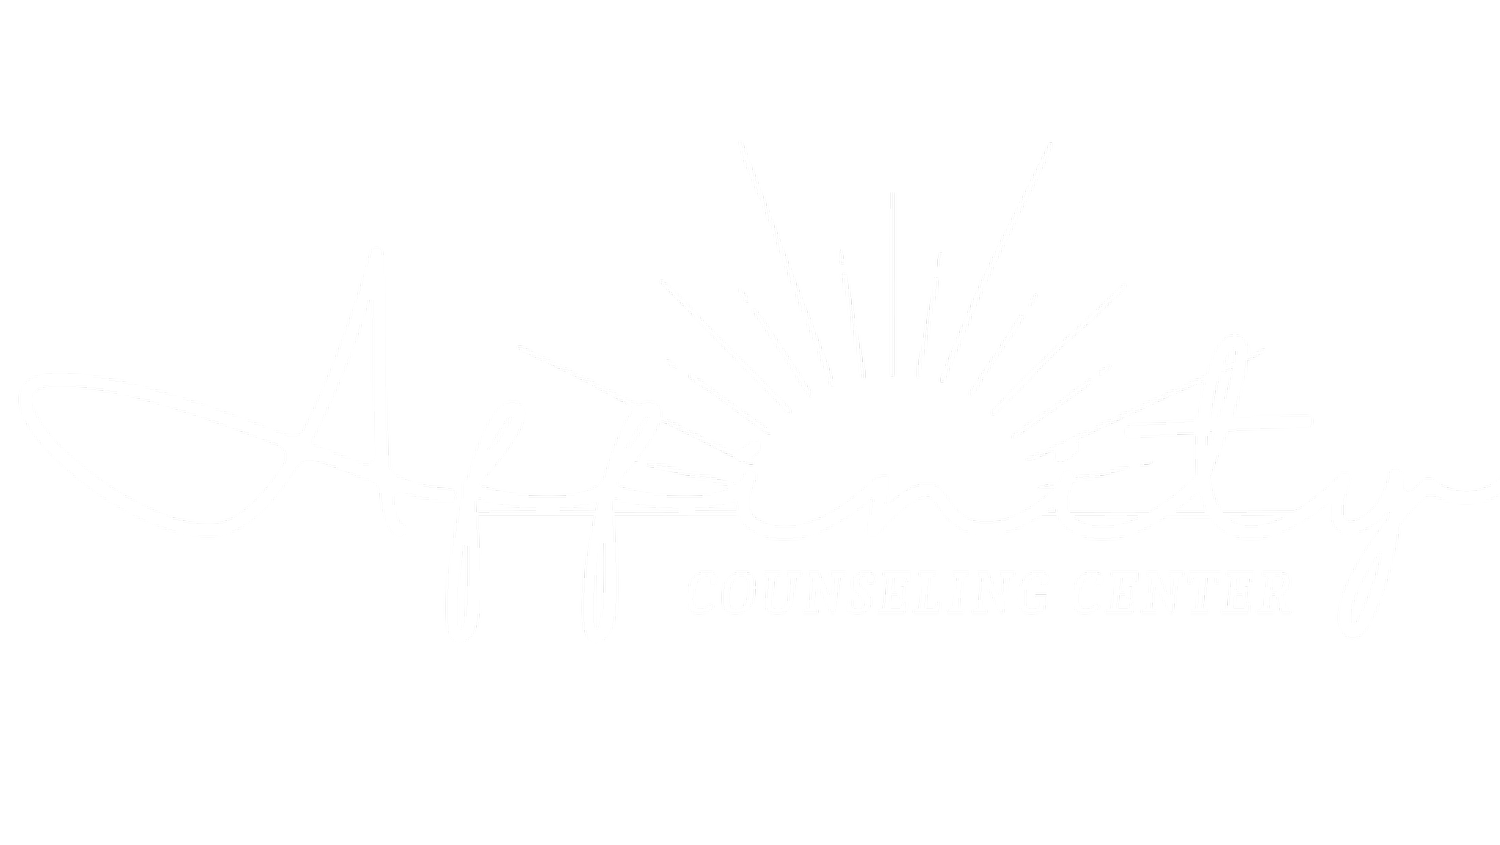 Affinity Counseling Center